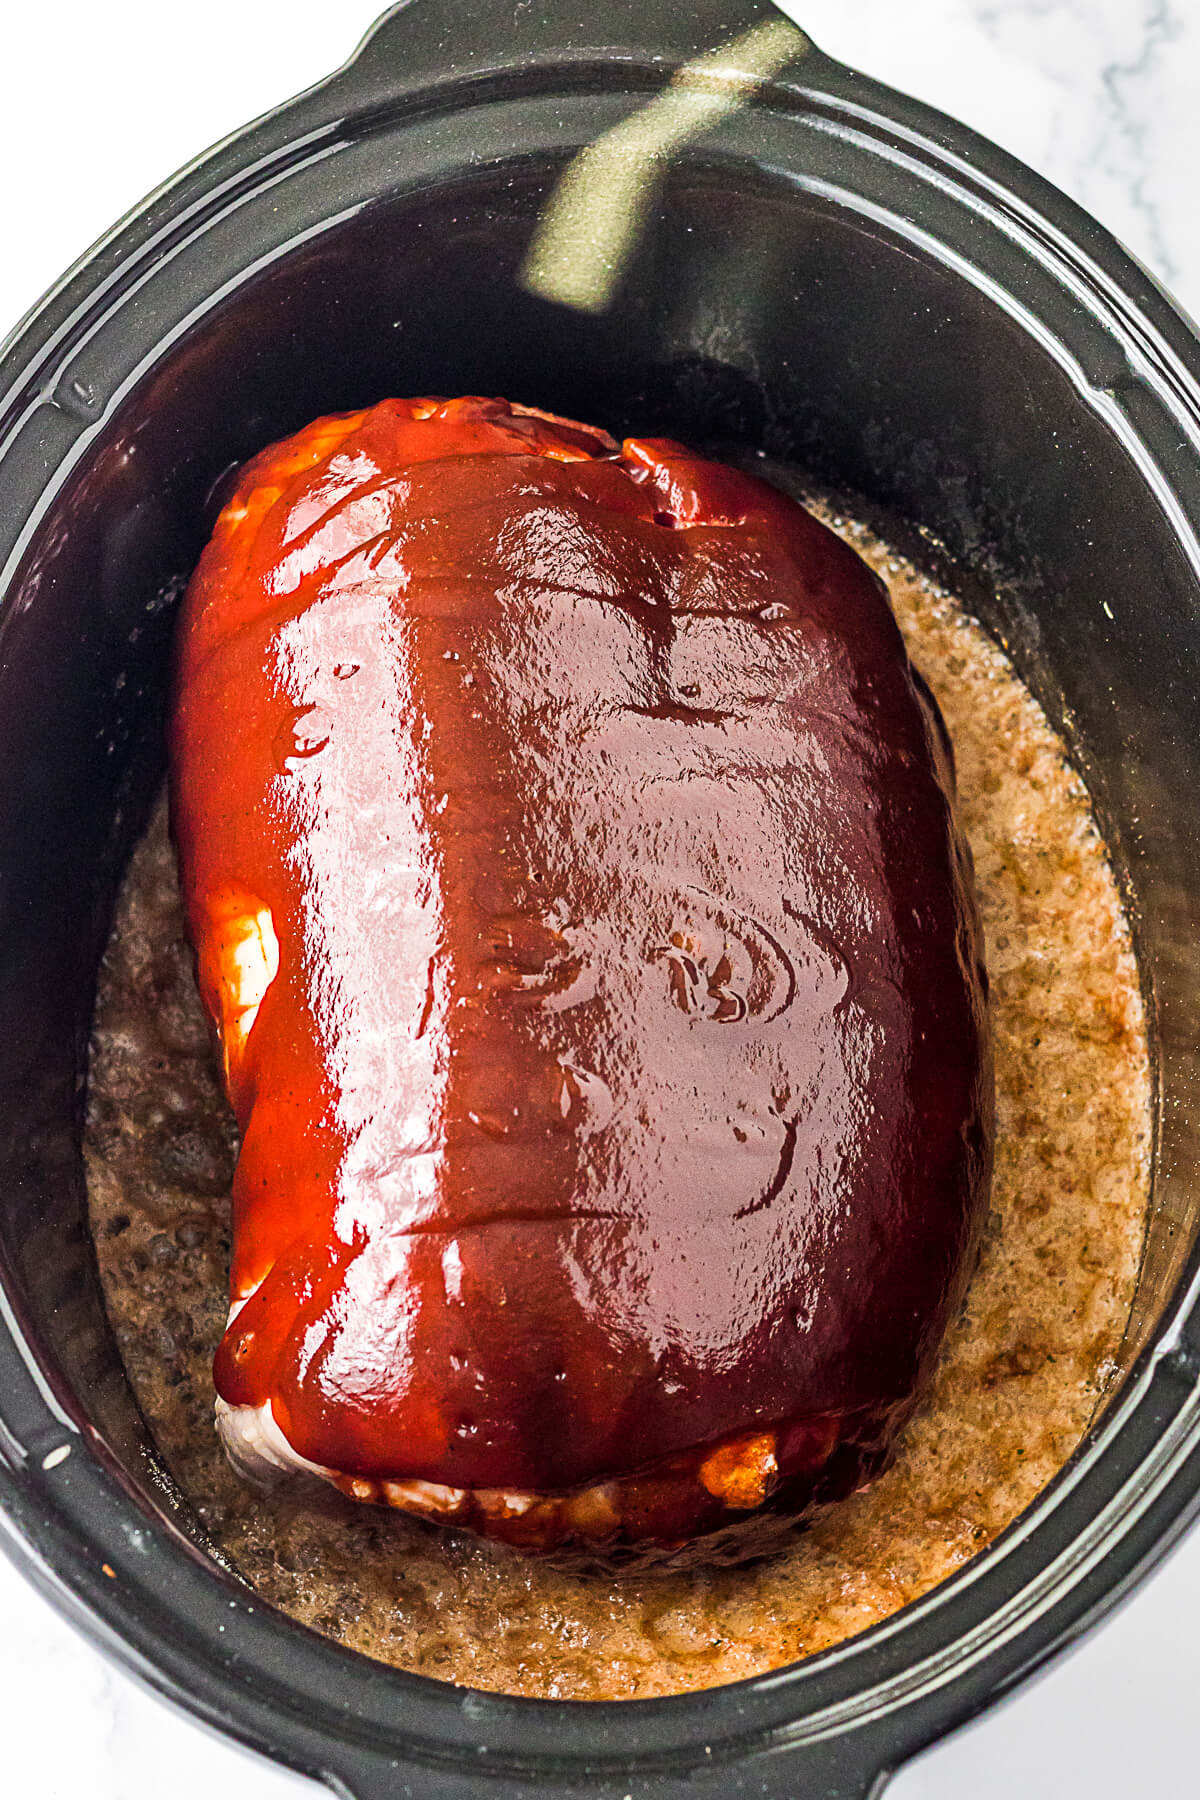 A pork shoulder butt roast covered in barbecue sauce in a slow cooker.